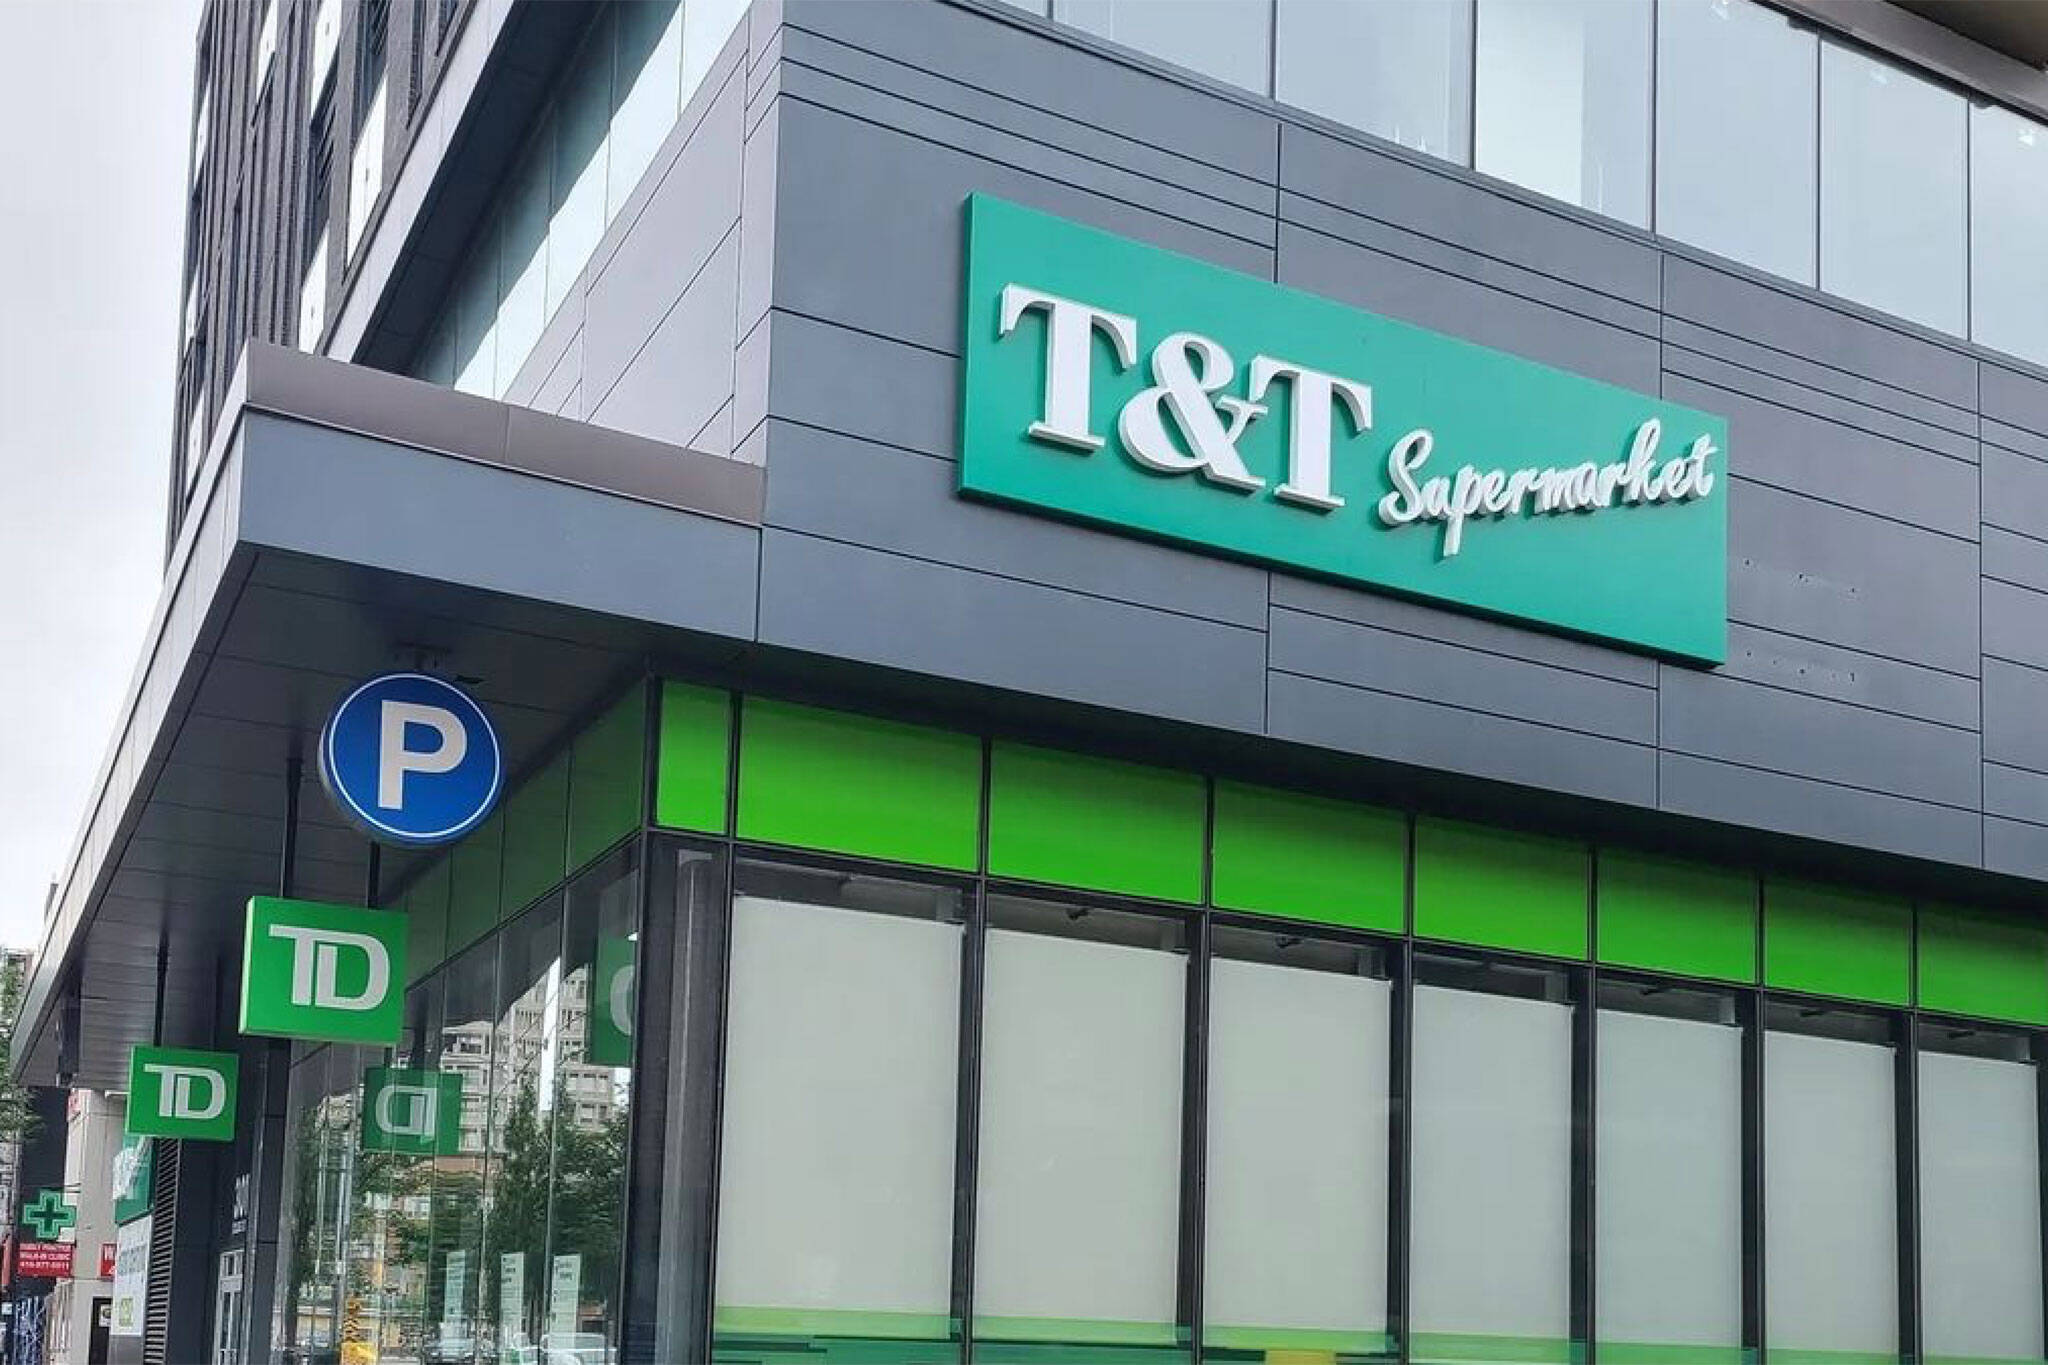 t and t supermarket college